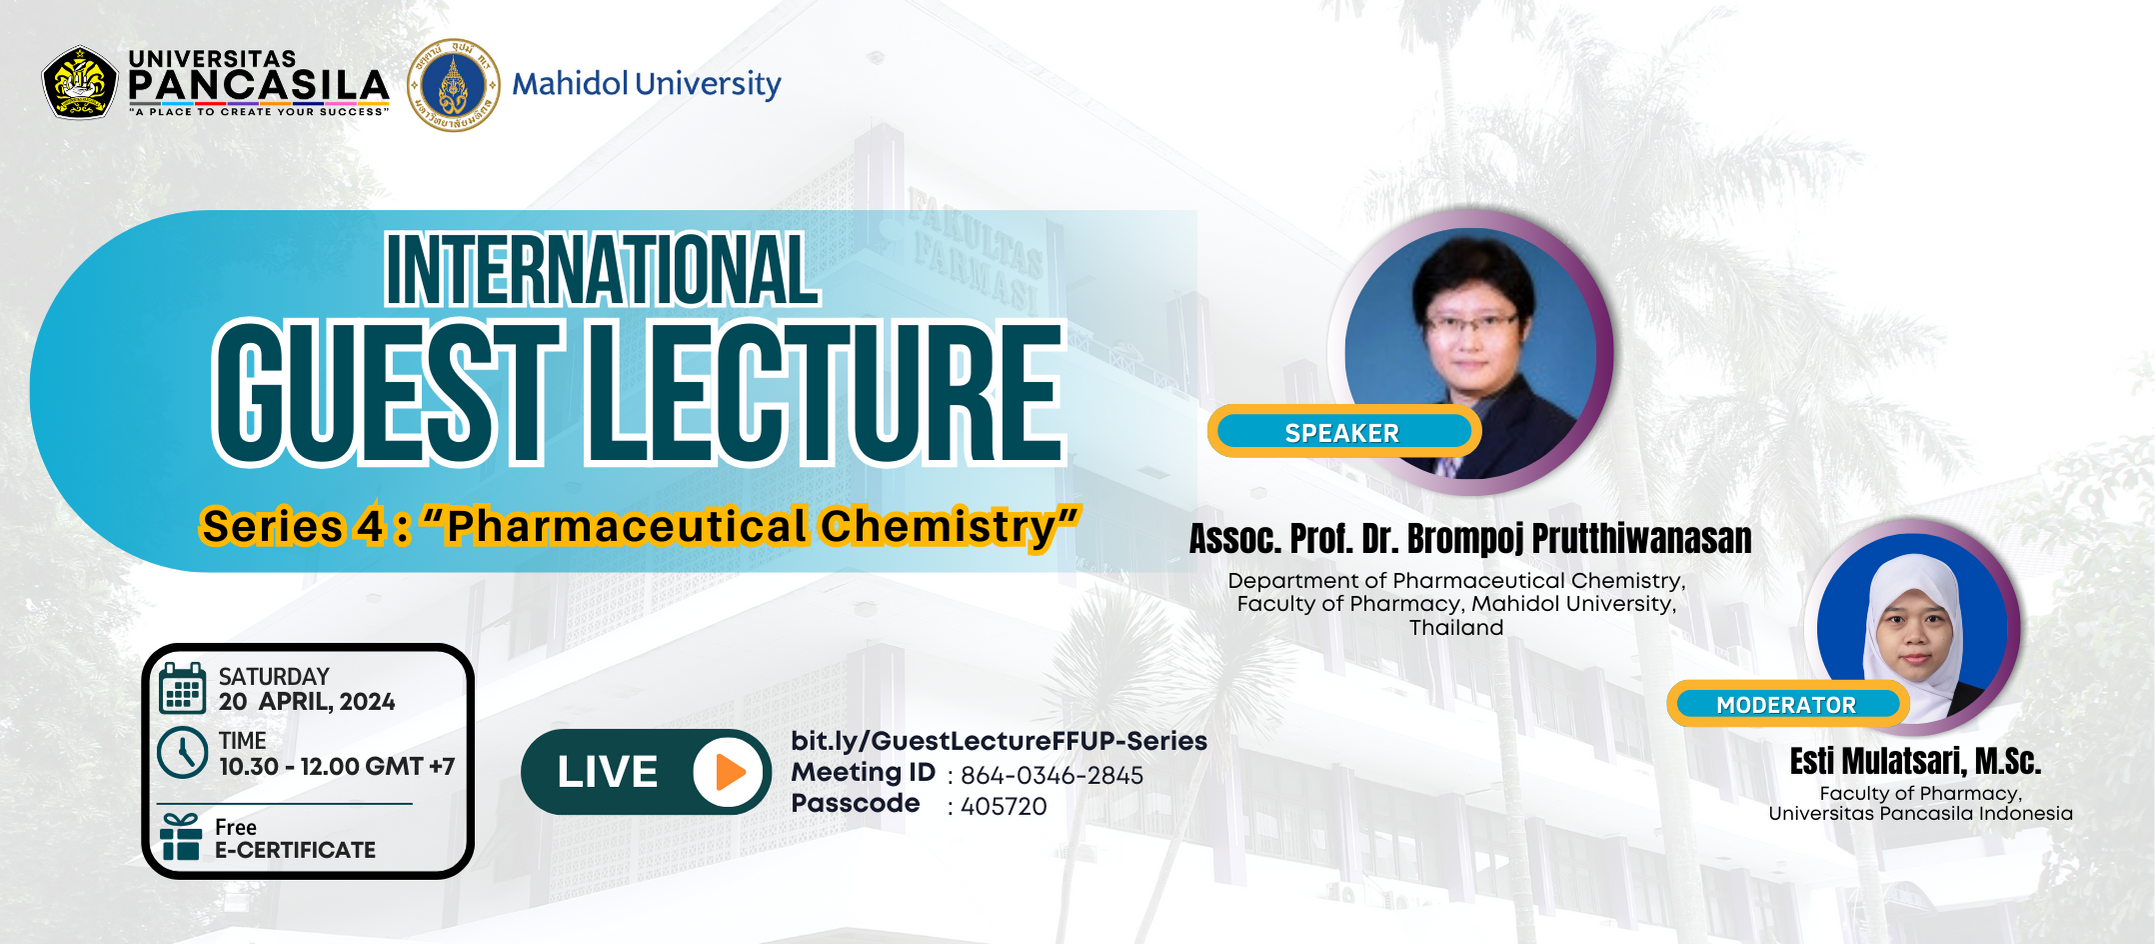 International Guest Lecture Series 4